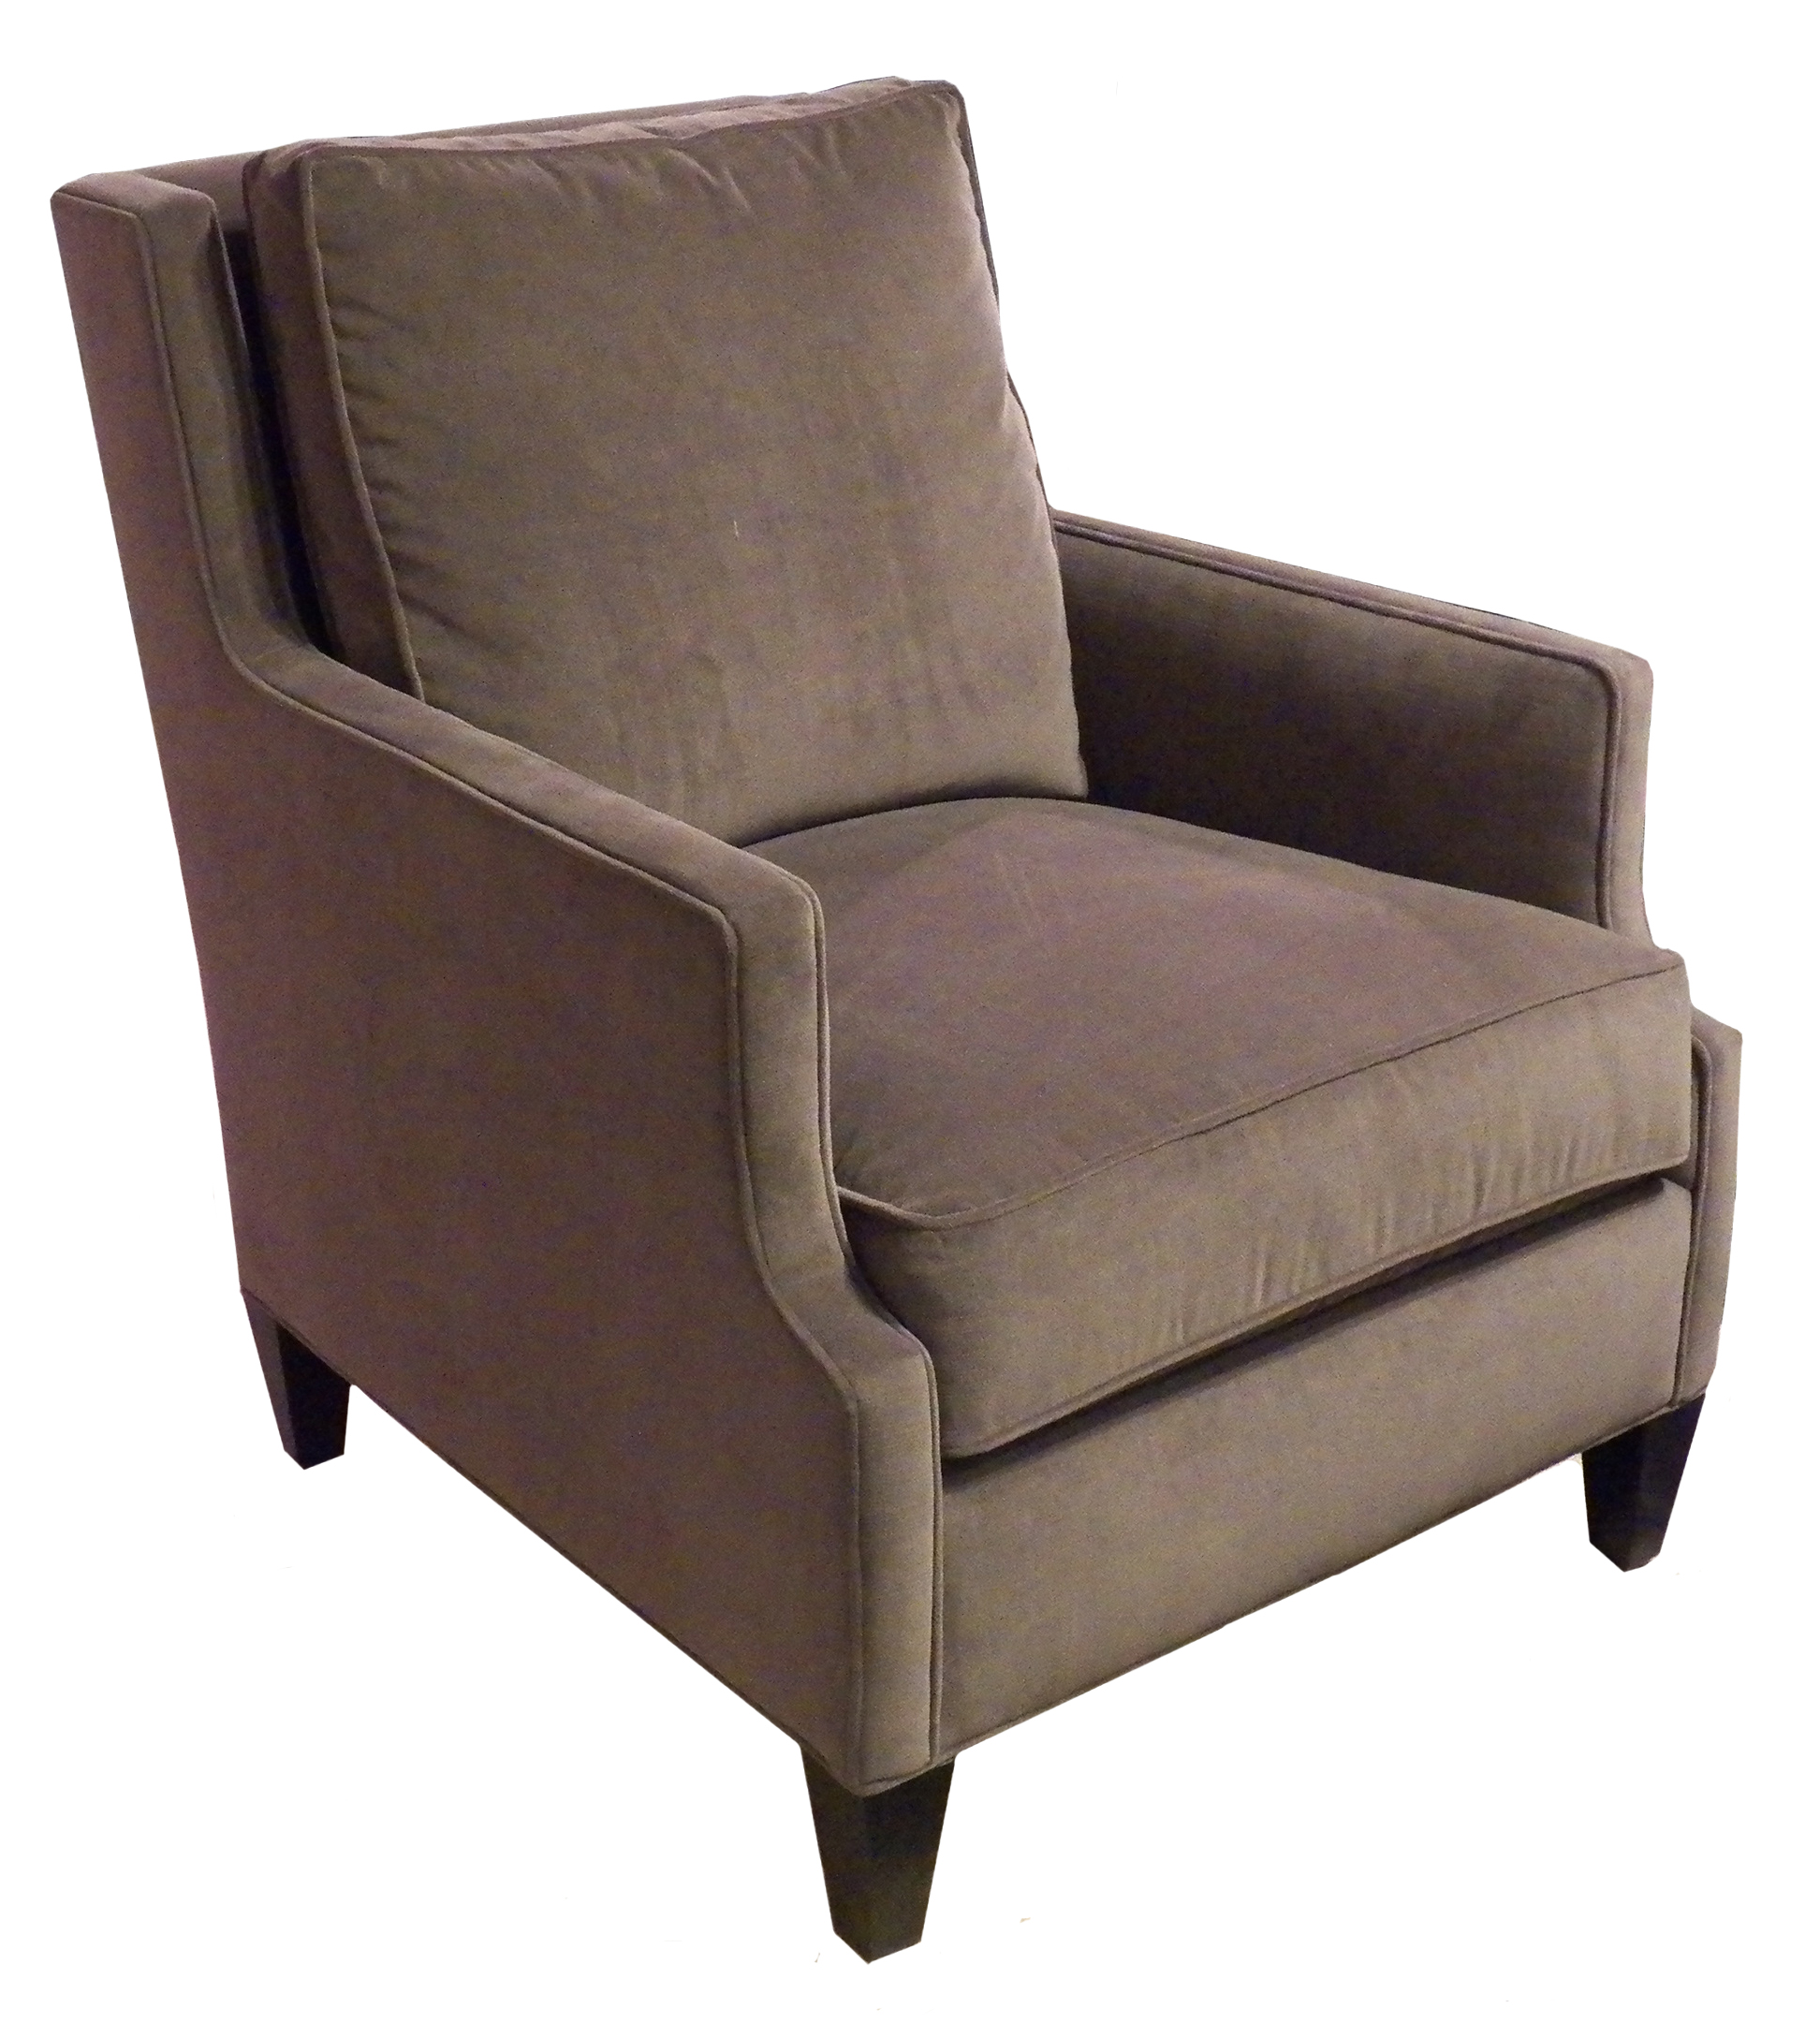 Drexel Heritage Lounge Chair - Click Image to Close